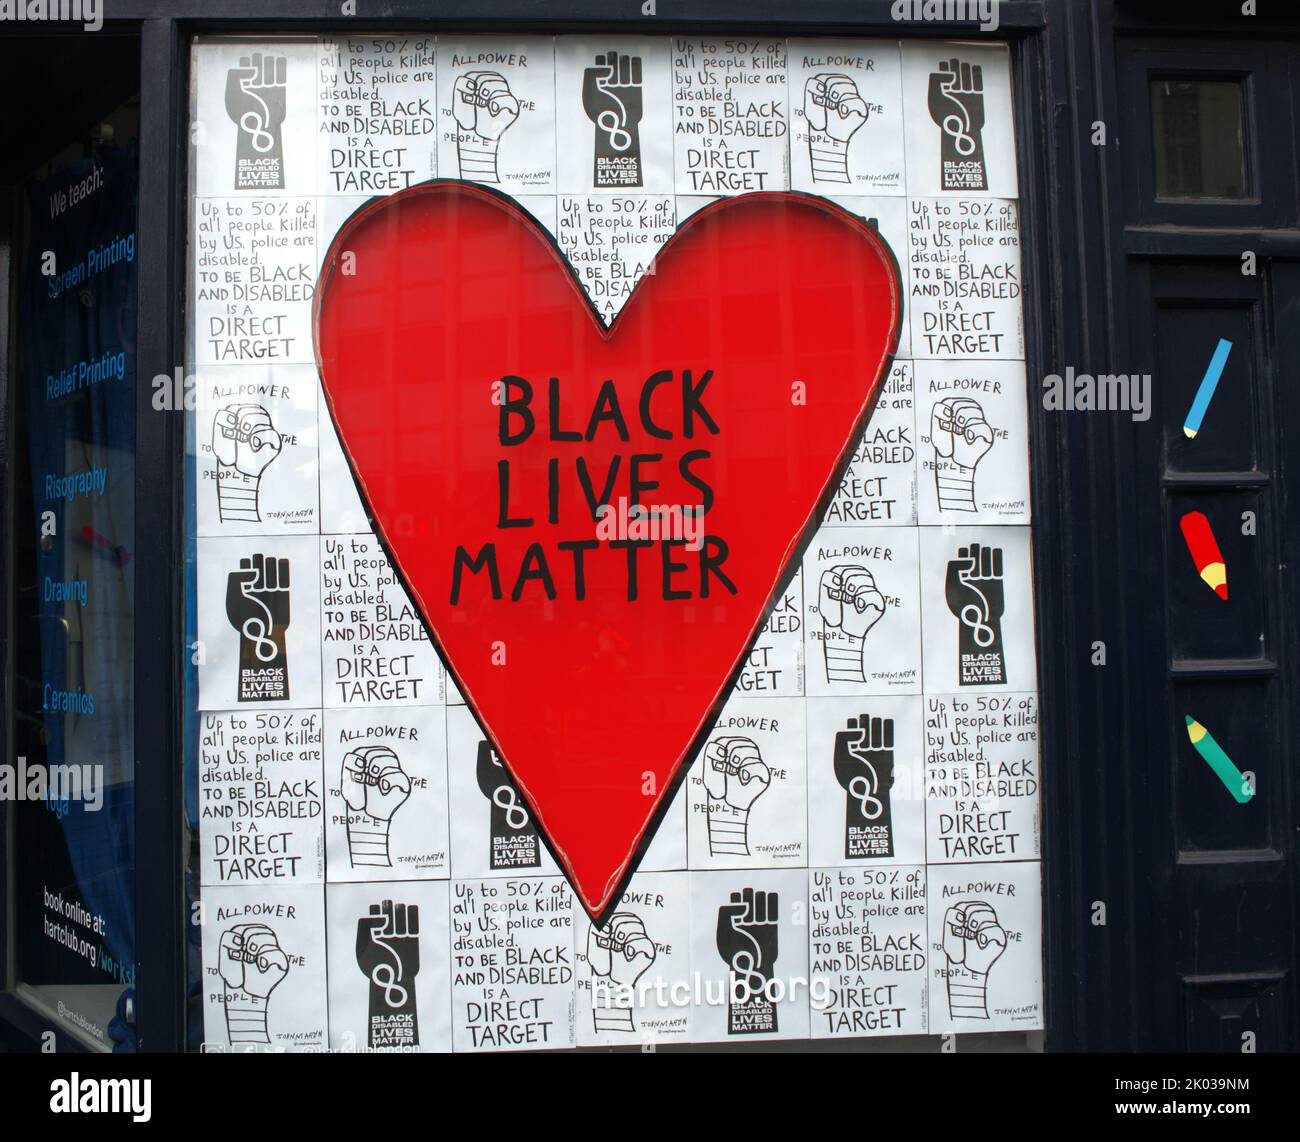 BLM sign in a London shop window June 2020. Black Lives Matter (BLM) is a decentralized political and social movement protesting against incidents of police brutality and all racially motivated violence against black people. Stock Photo